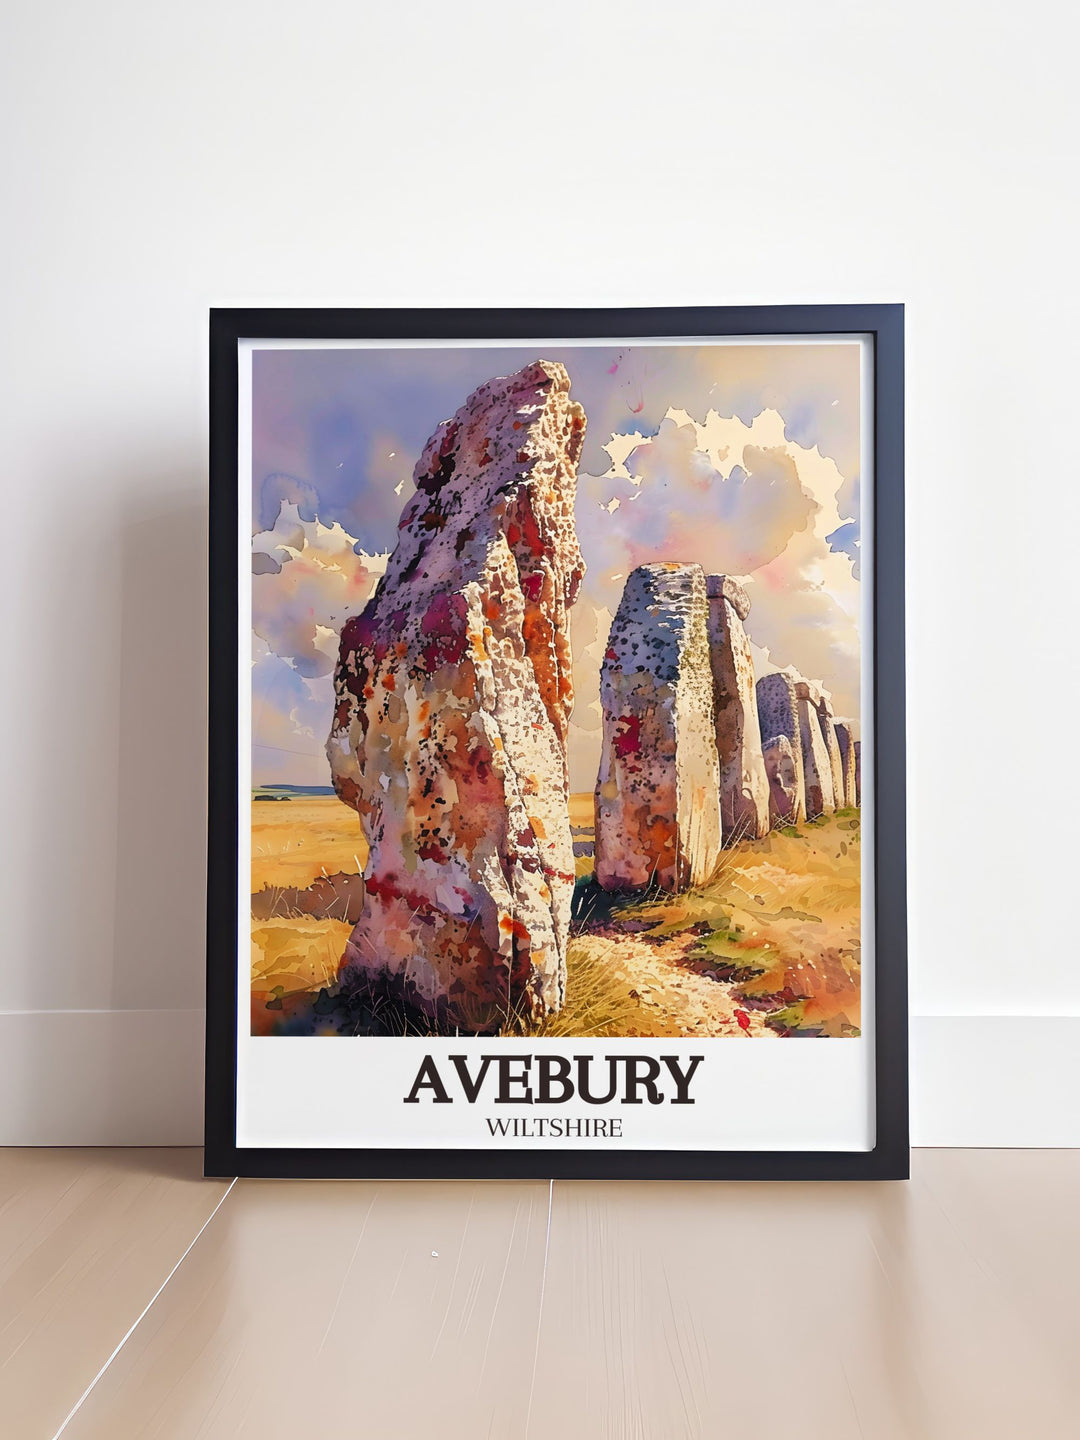 Showcasing the dramatic chalk hills and lush vegetation of the North Wessex Downs, this art print highlights one of the UKs most treasured natural landscapes.